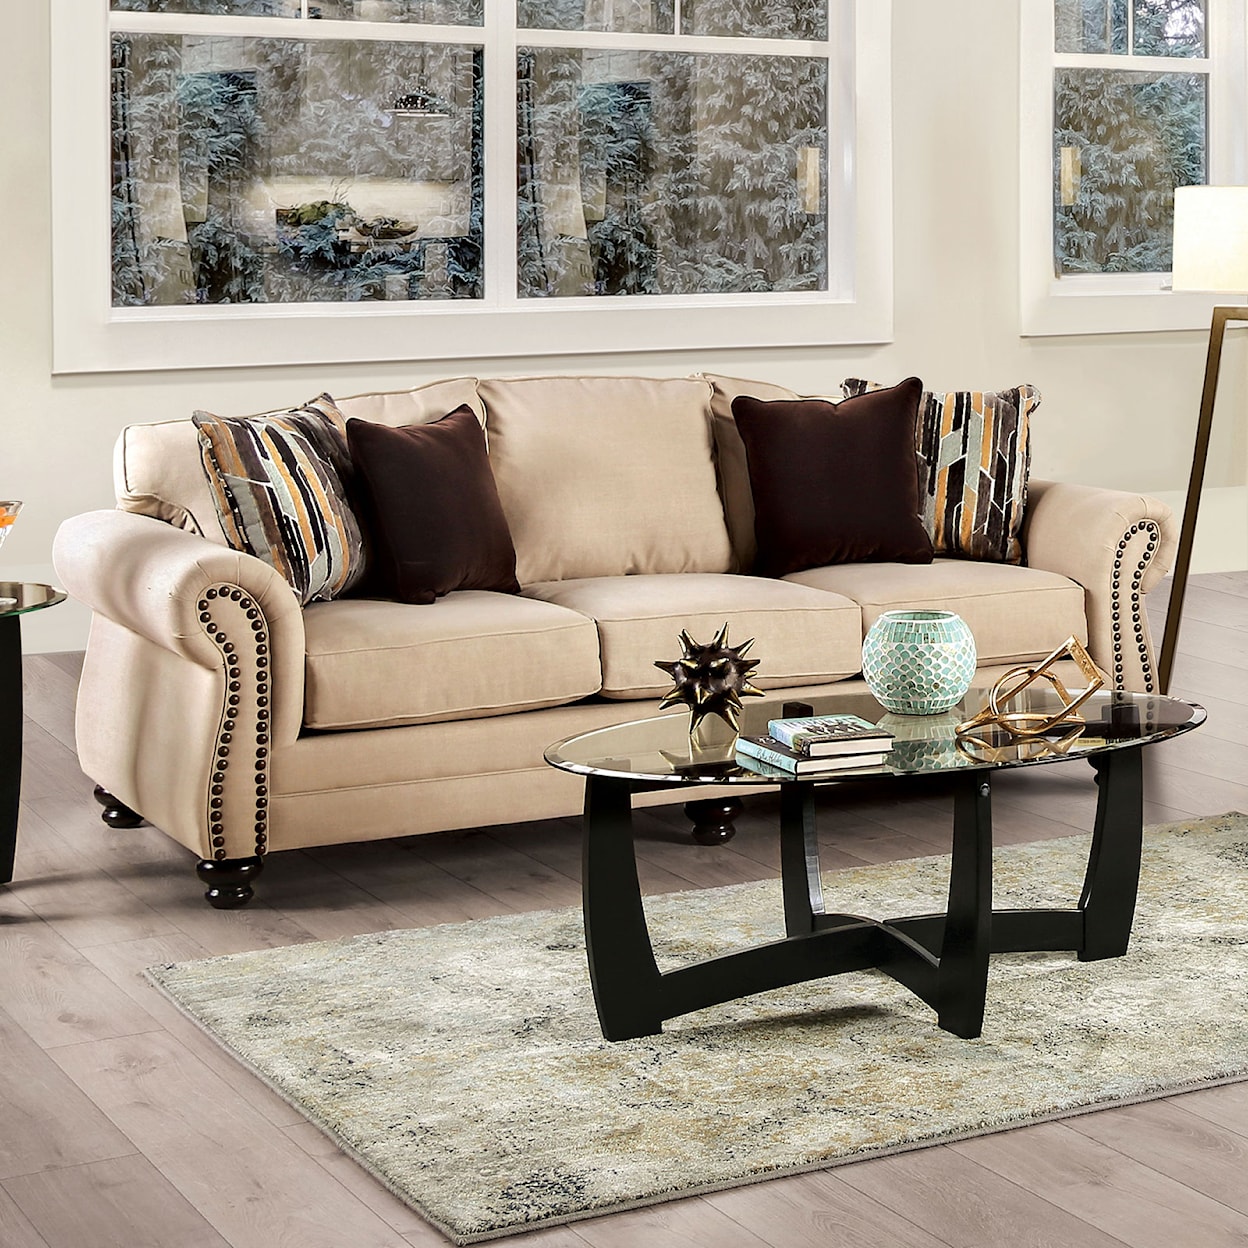 Furniture of America Kailyn Sofa and Loveseat Set